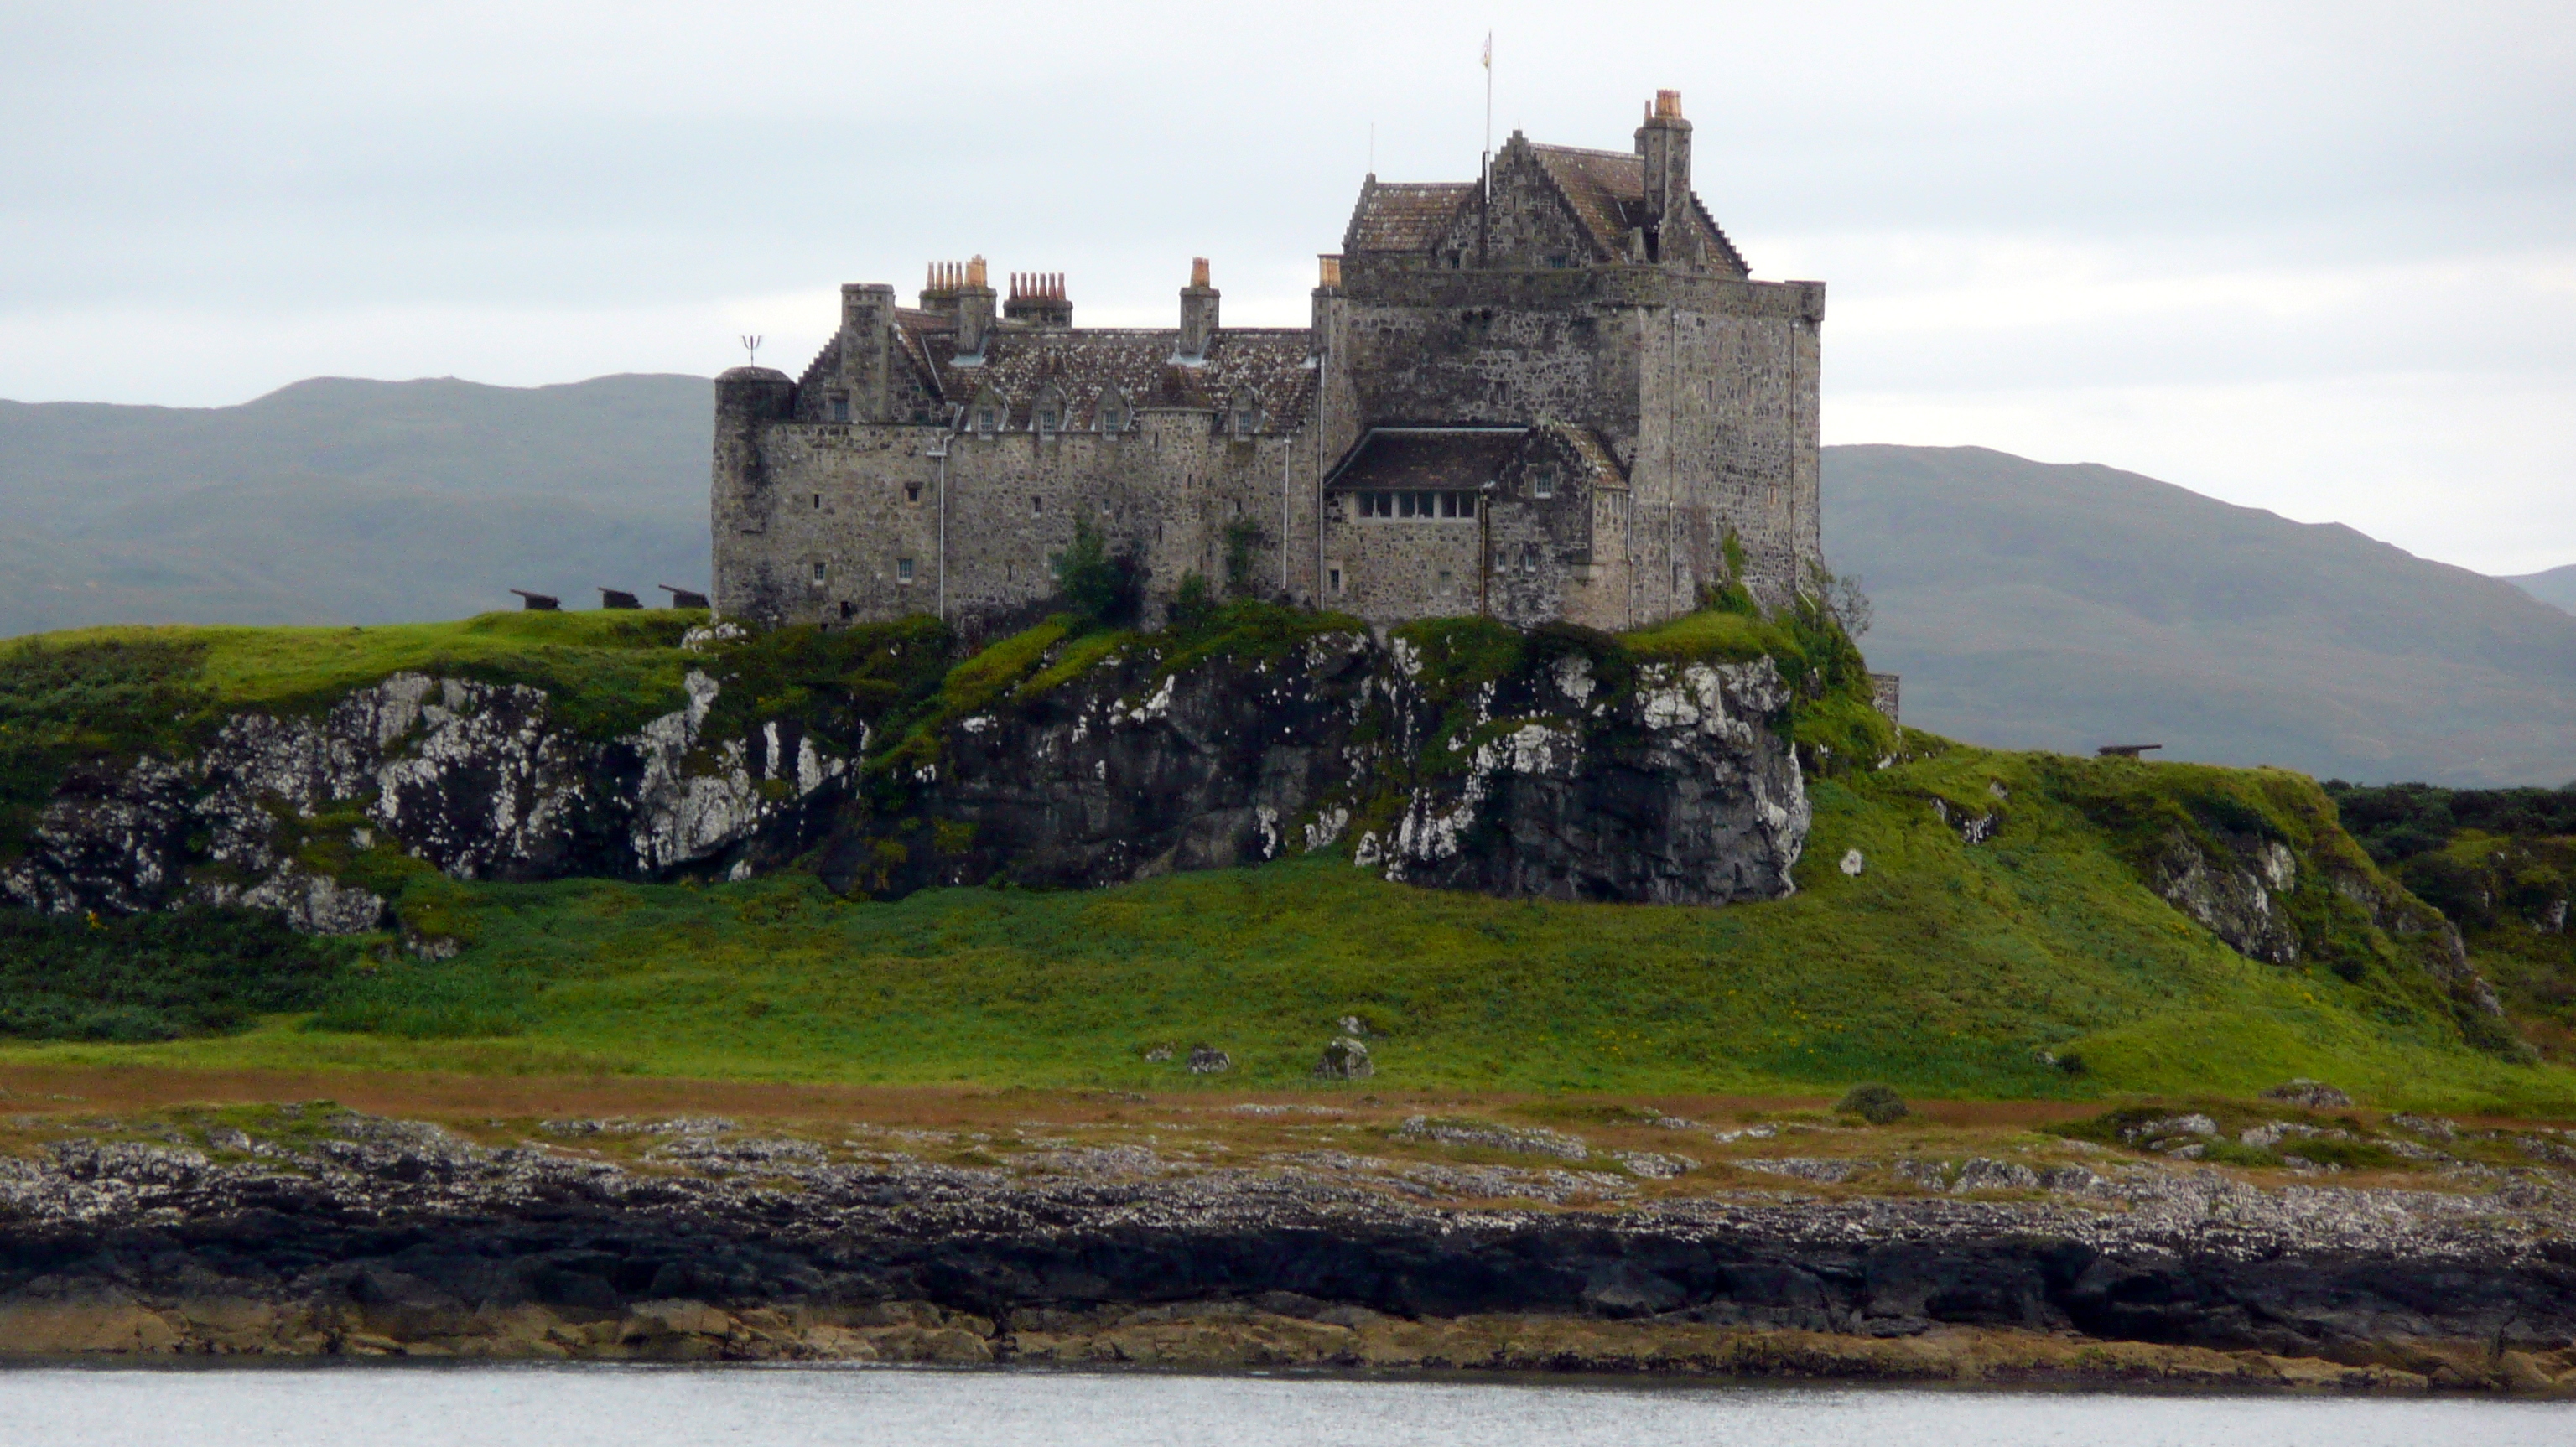 Our ferry passed Duart Castle as we sailed to the Isle of Mull. (2008)